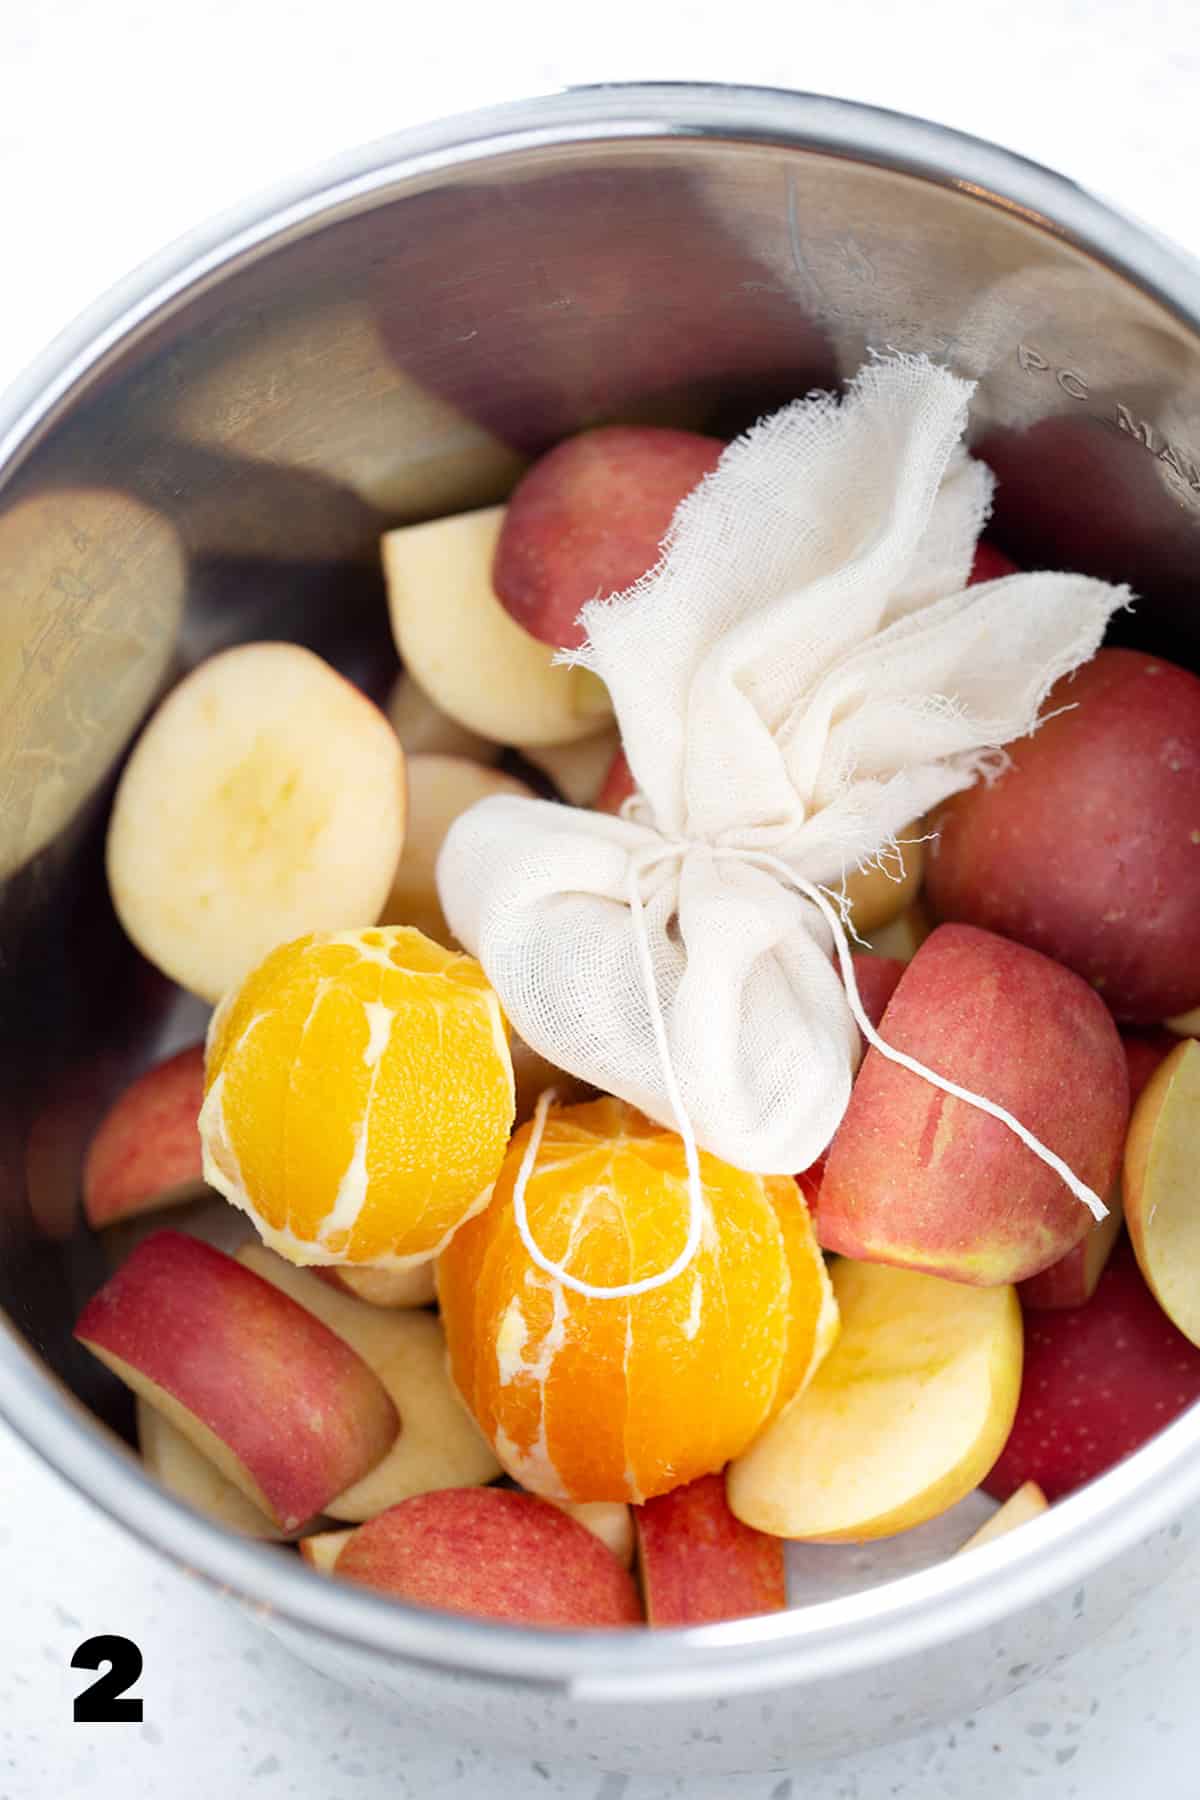 Instant pot full of oranges, apples and cheesecloth sachet.